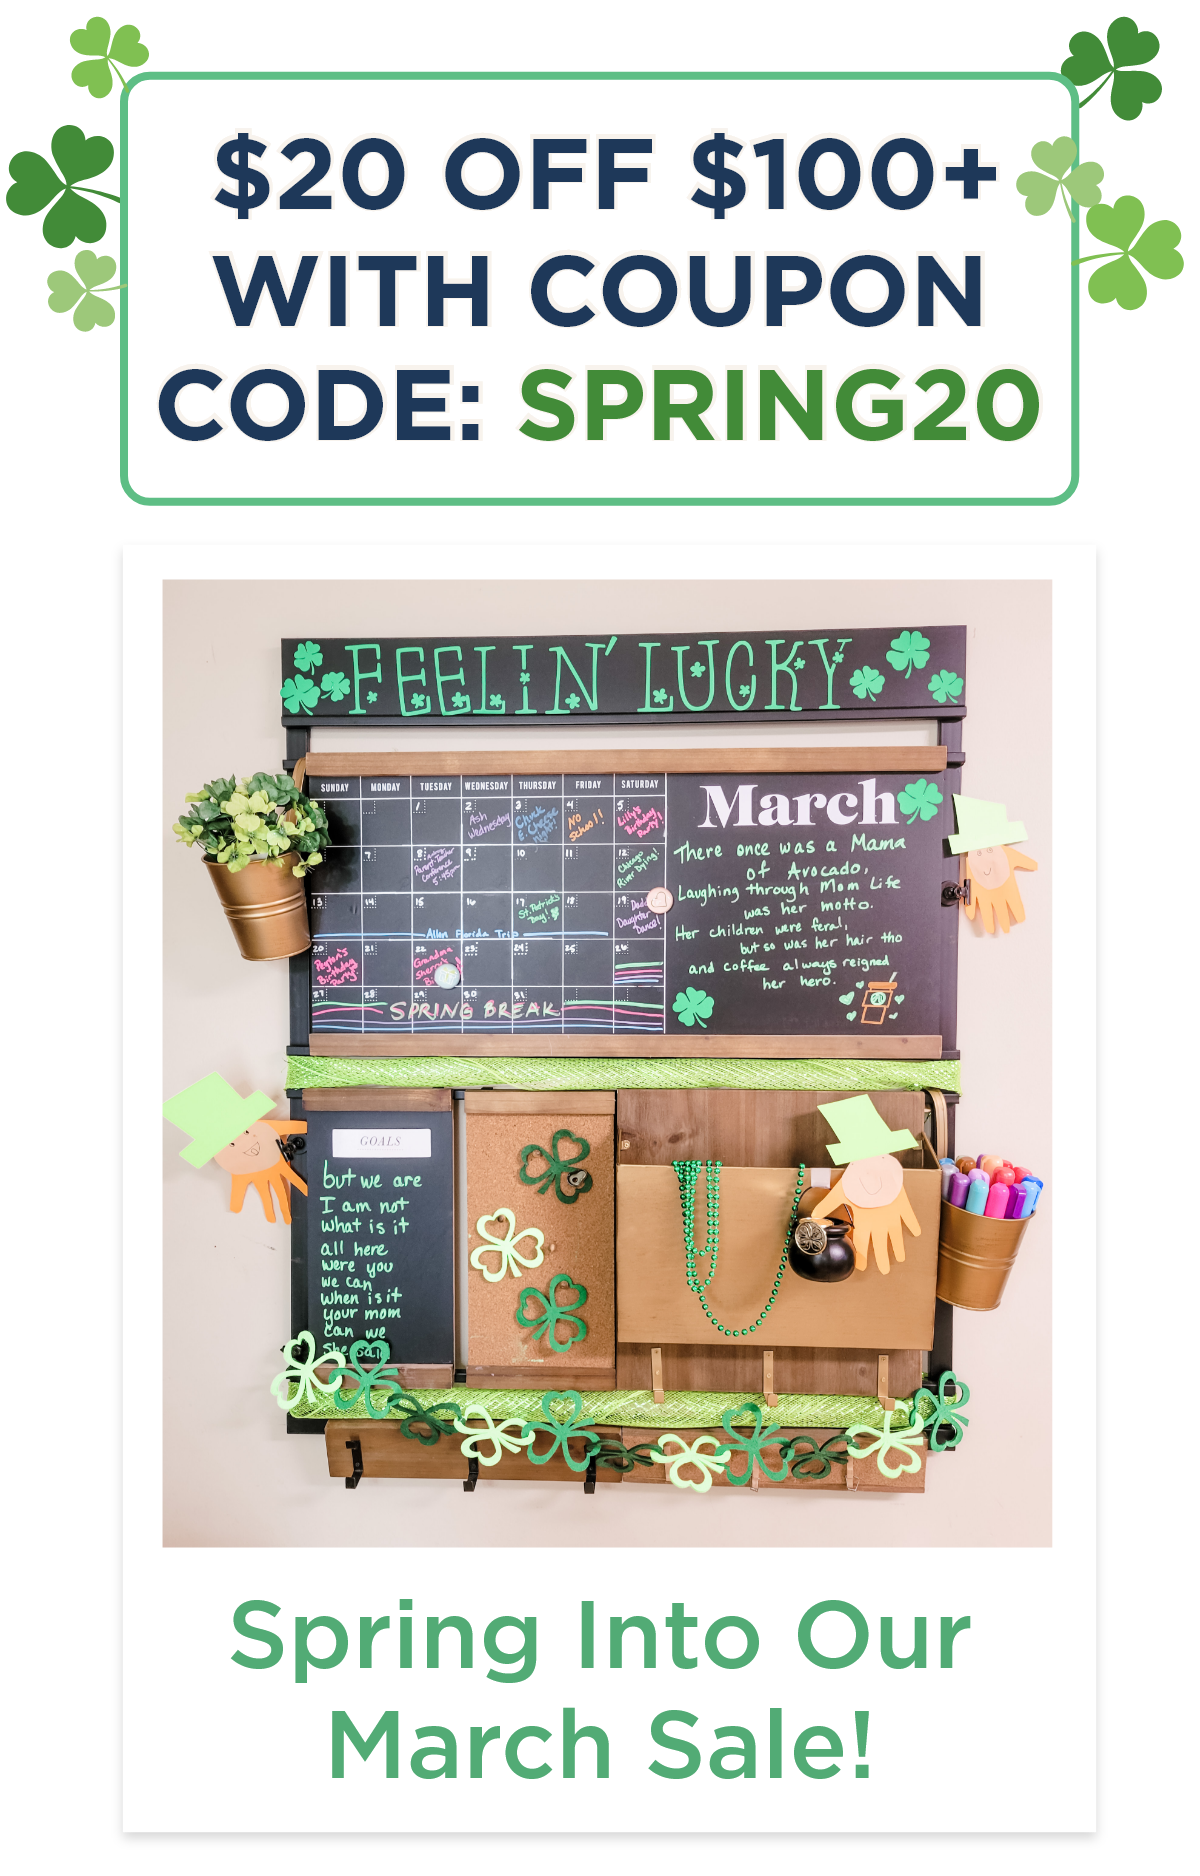 $20 off $100+ With Coupon Code: Spring20 Spring into Our March Sale! 